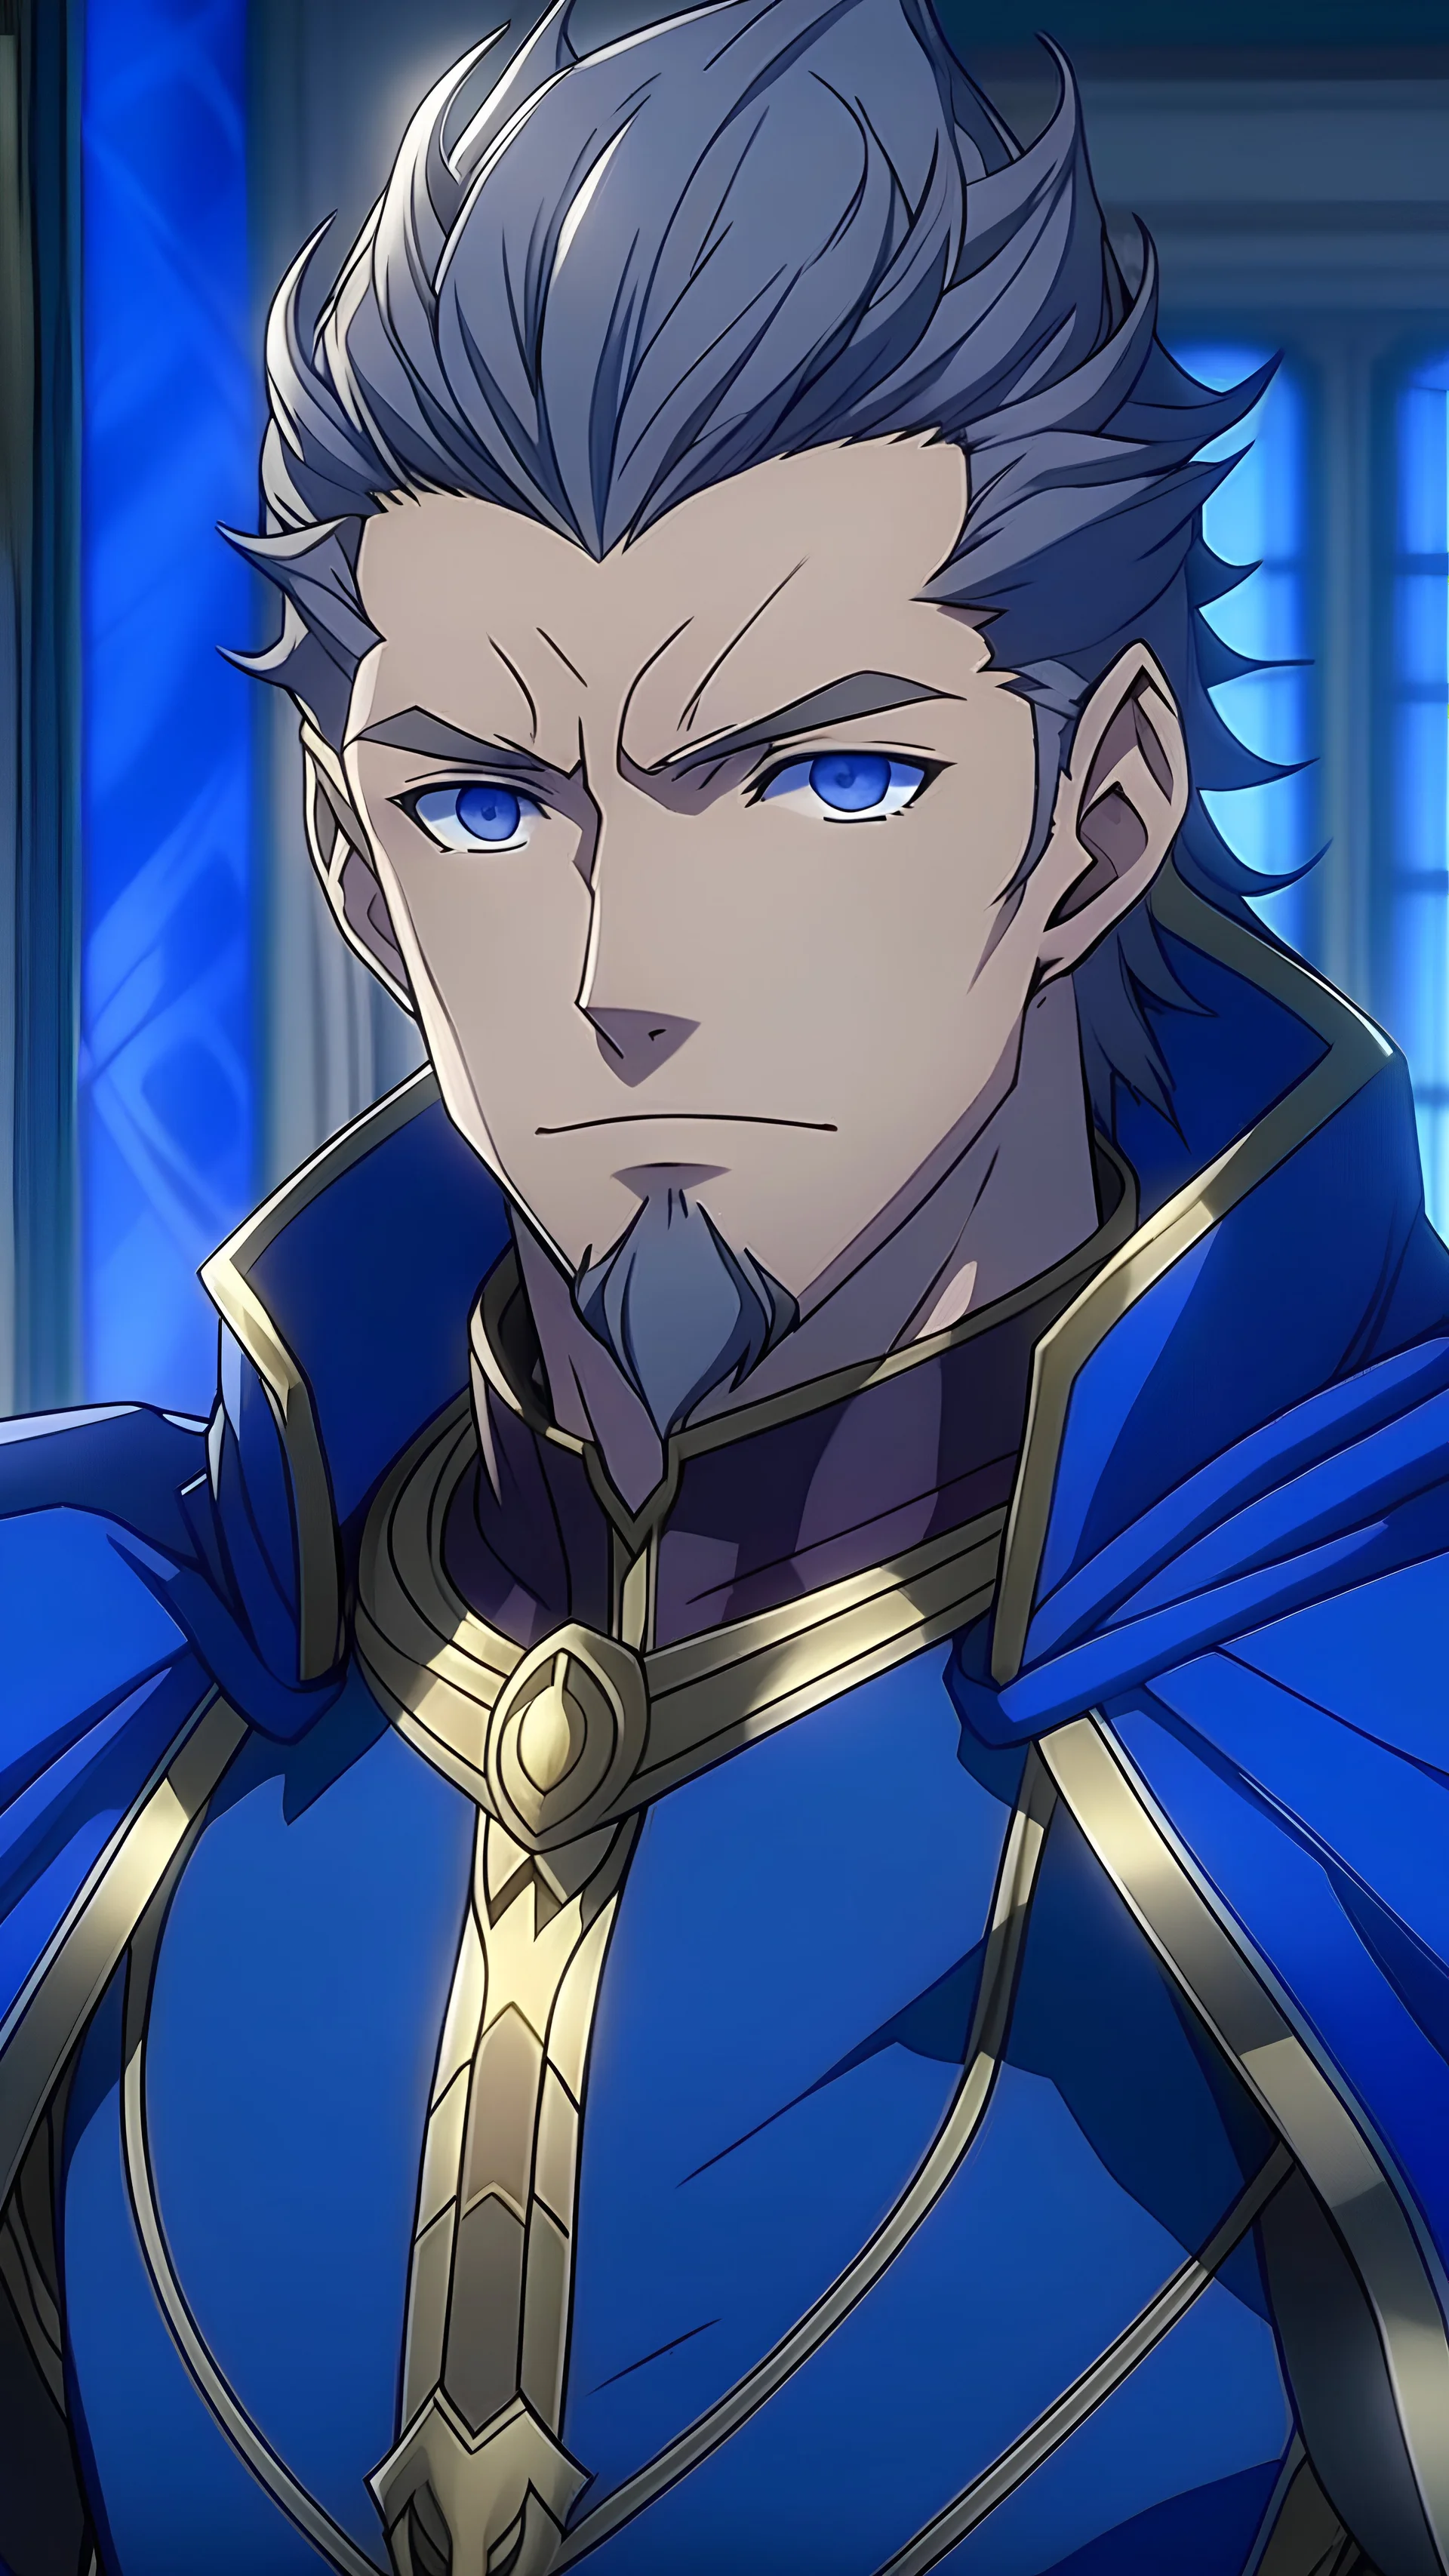 Sigurd from Fate/gRAND order